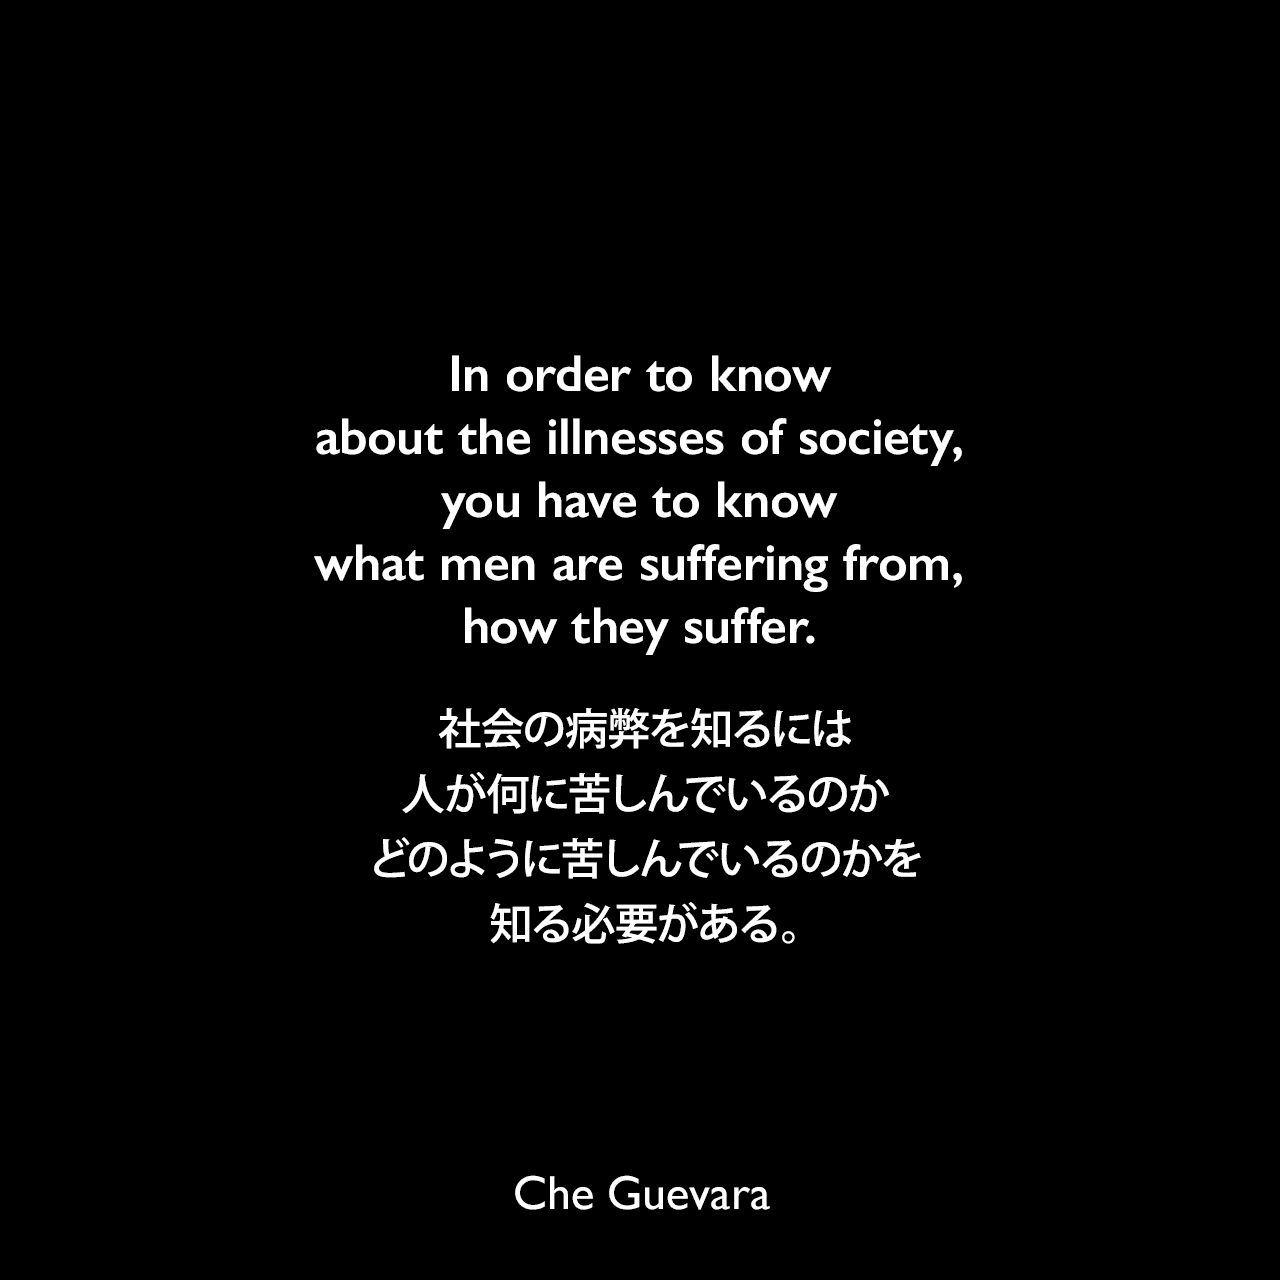 In order to know about the illnesses of society, you have to know what men are suffering from, how they suffer.社会の病弊を知るには、人が何に苦しんでいるのか、どのように苦しんでいるのかを知る必要がある。- マータ・ロジャスによる本「Testimonies About Che」よりChe Guevara